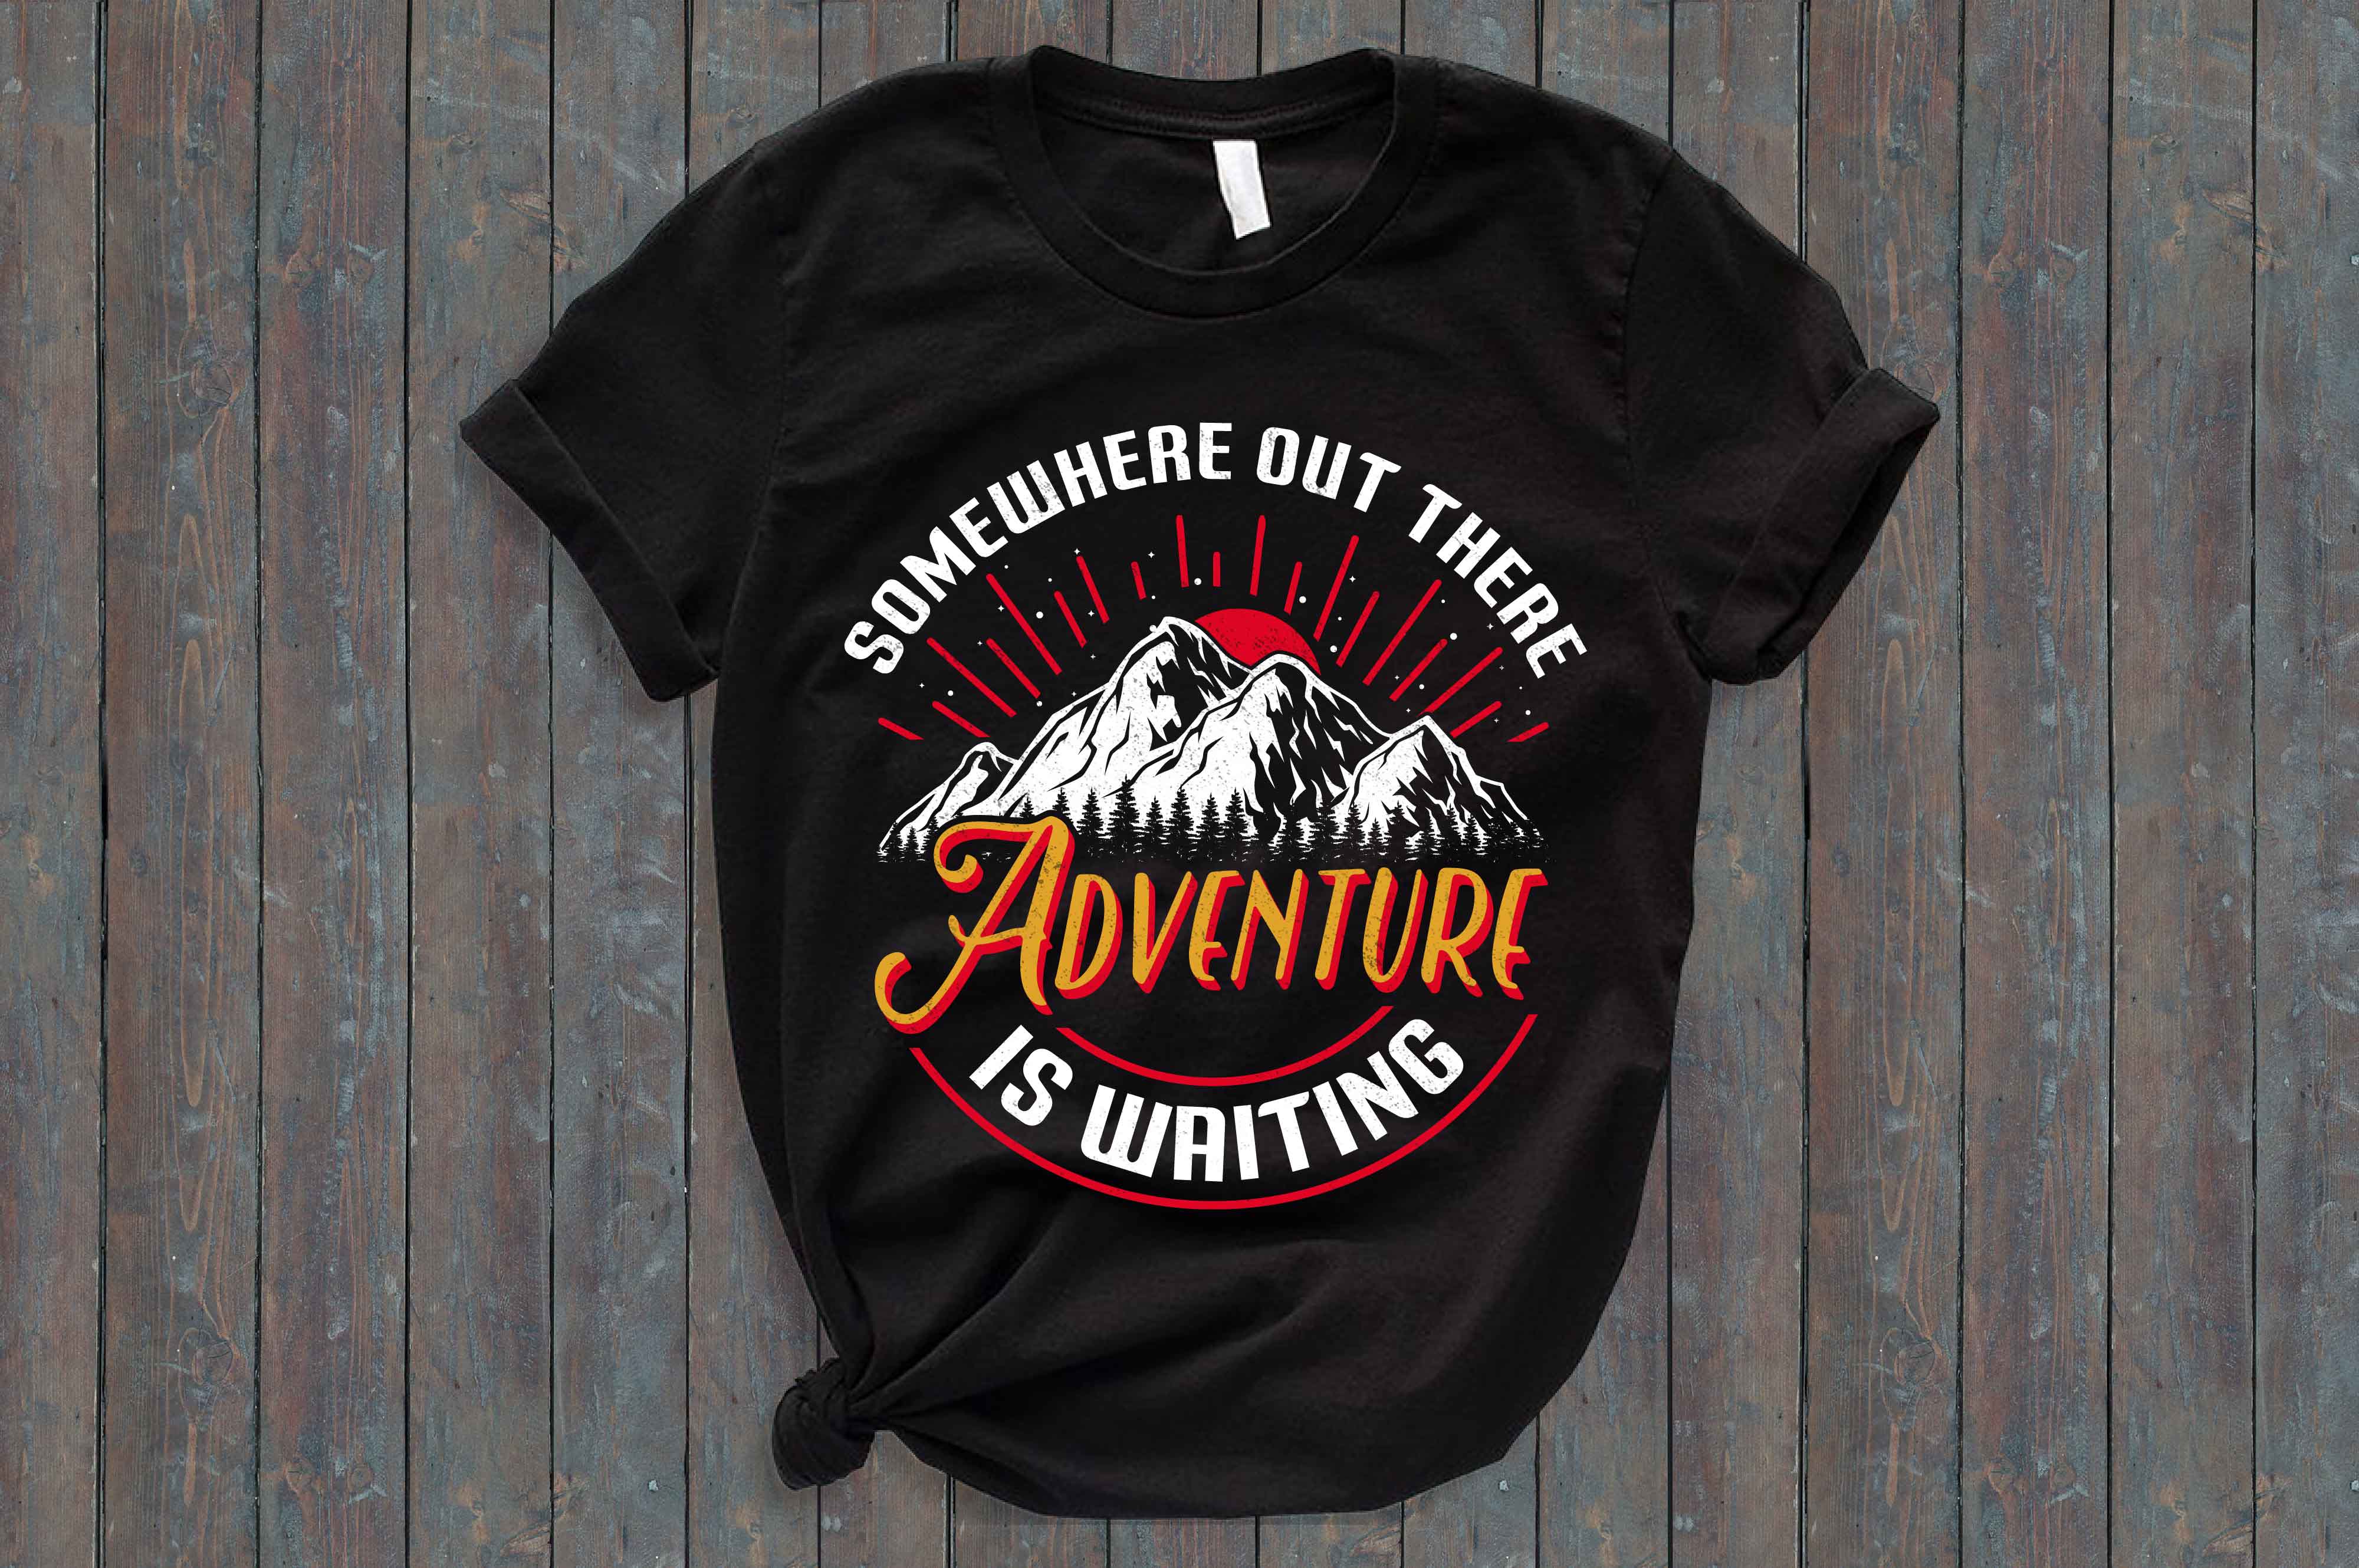 Black t - shirt with the words adventure is waiting on it.